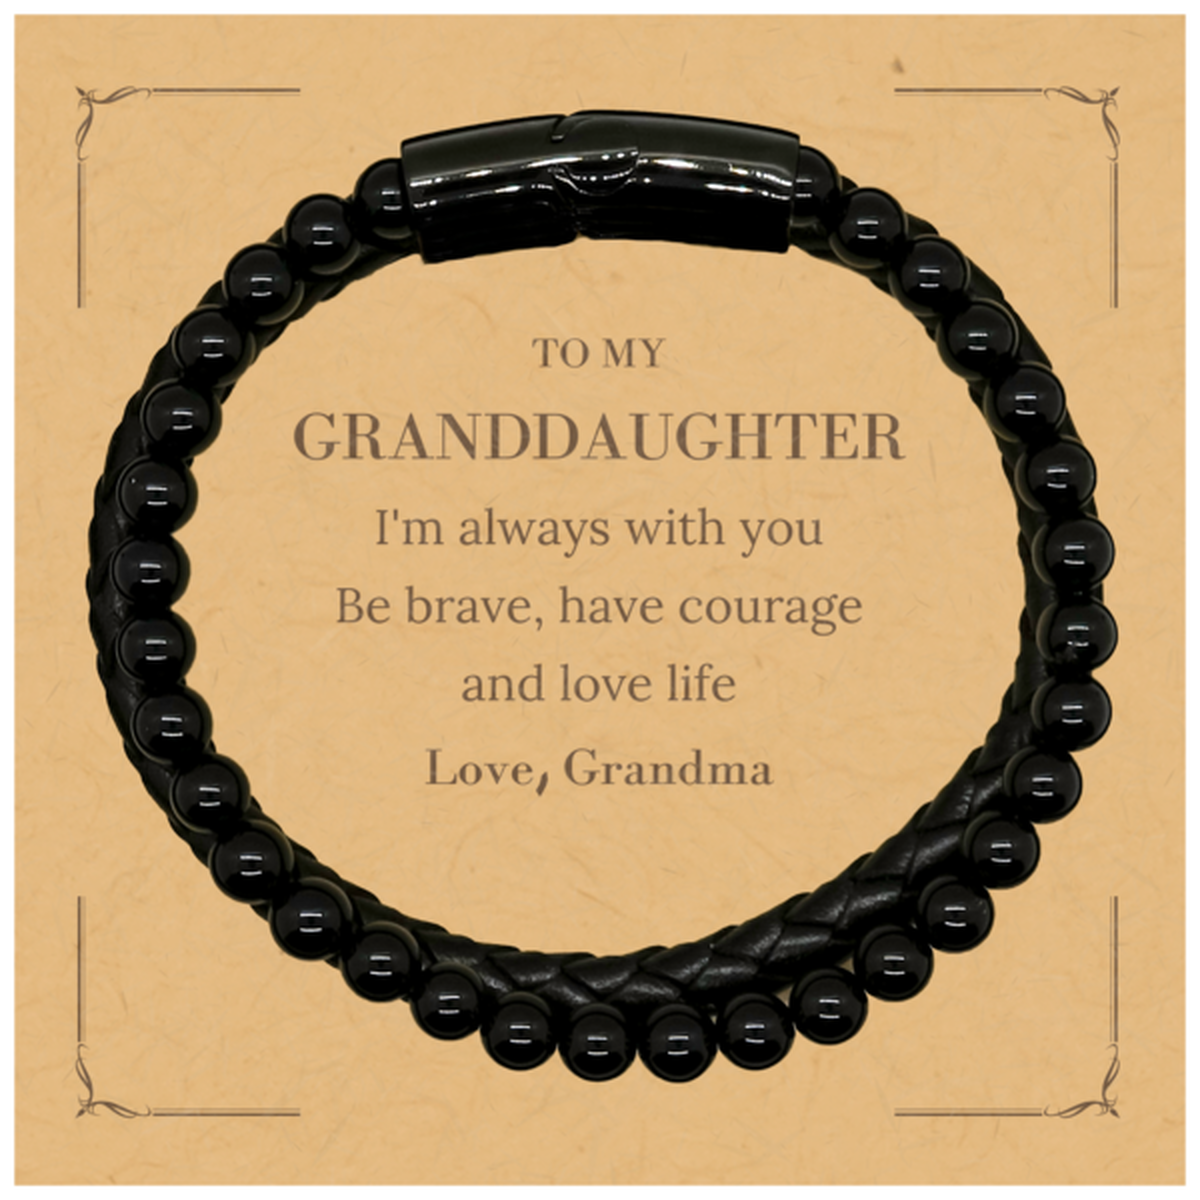 To My Granddaughter Gifts from Grandma, Unique Stone Leather Bracelets Inspirational Christmas Birthday Graduation Gifts for Granddaughter I'm always with you. Be brave, have courage and love life. Love, Grandma